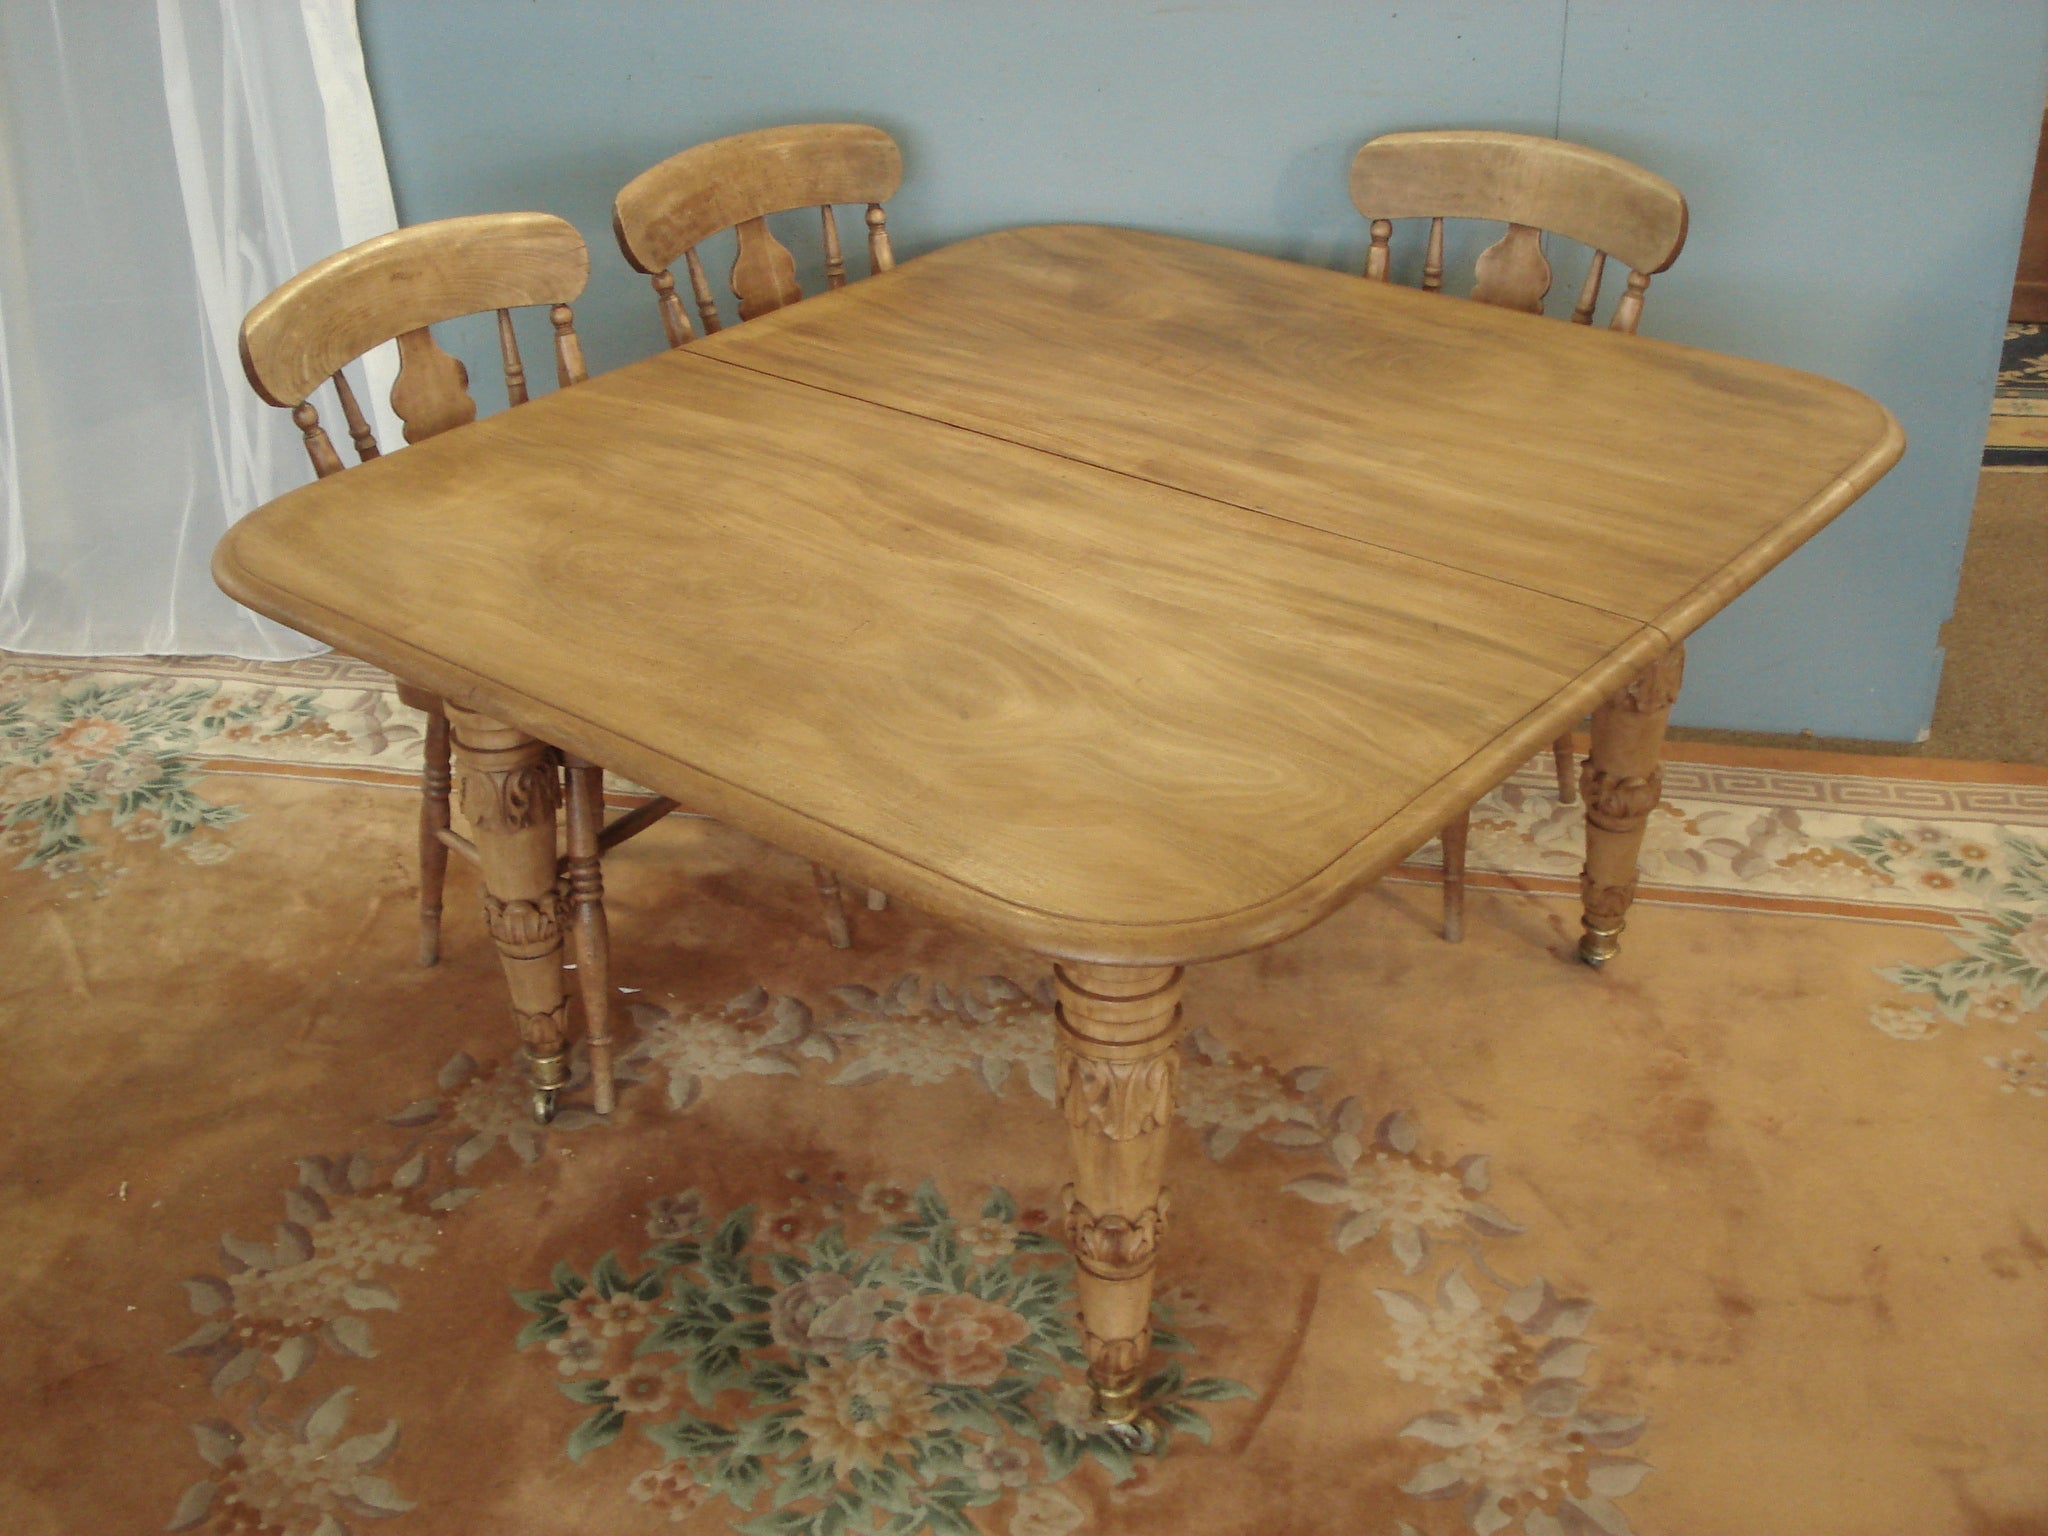 Extending Regency Blonde Mahogany table. 51" wide by 113" long max.